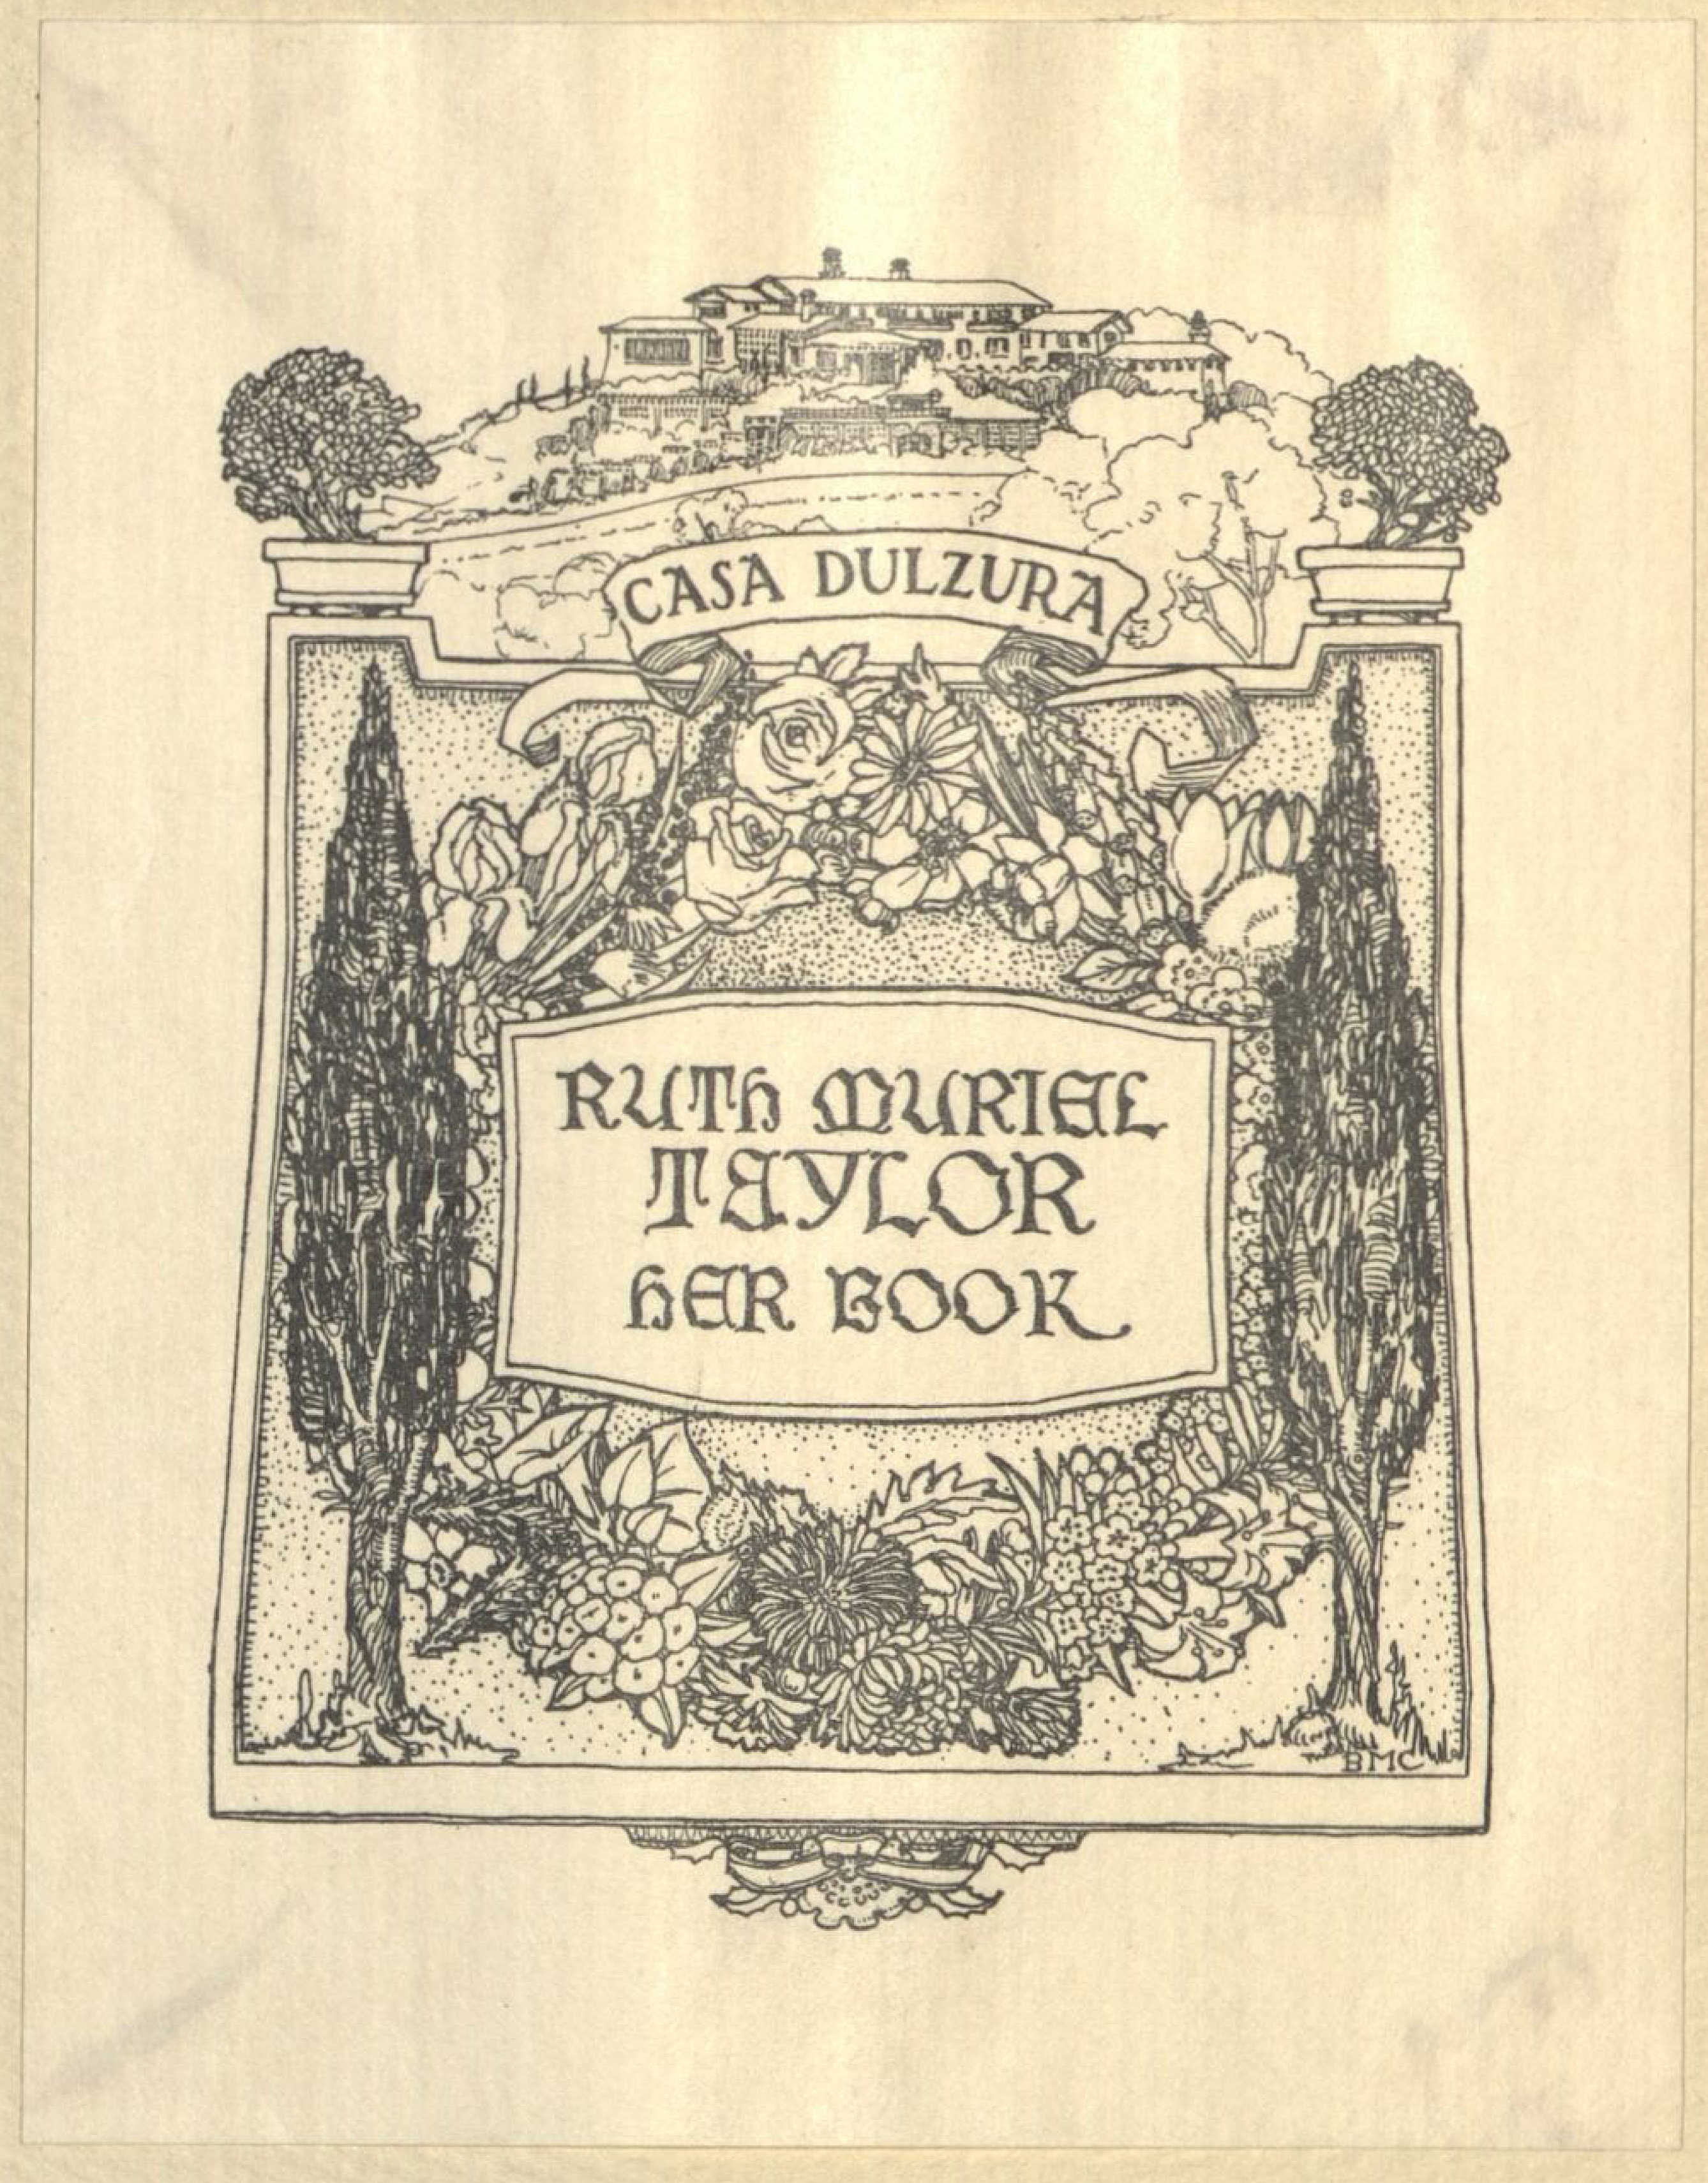 Bookplate of Ruth Muriel Taylor.